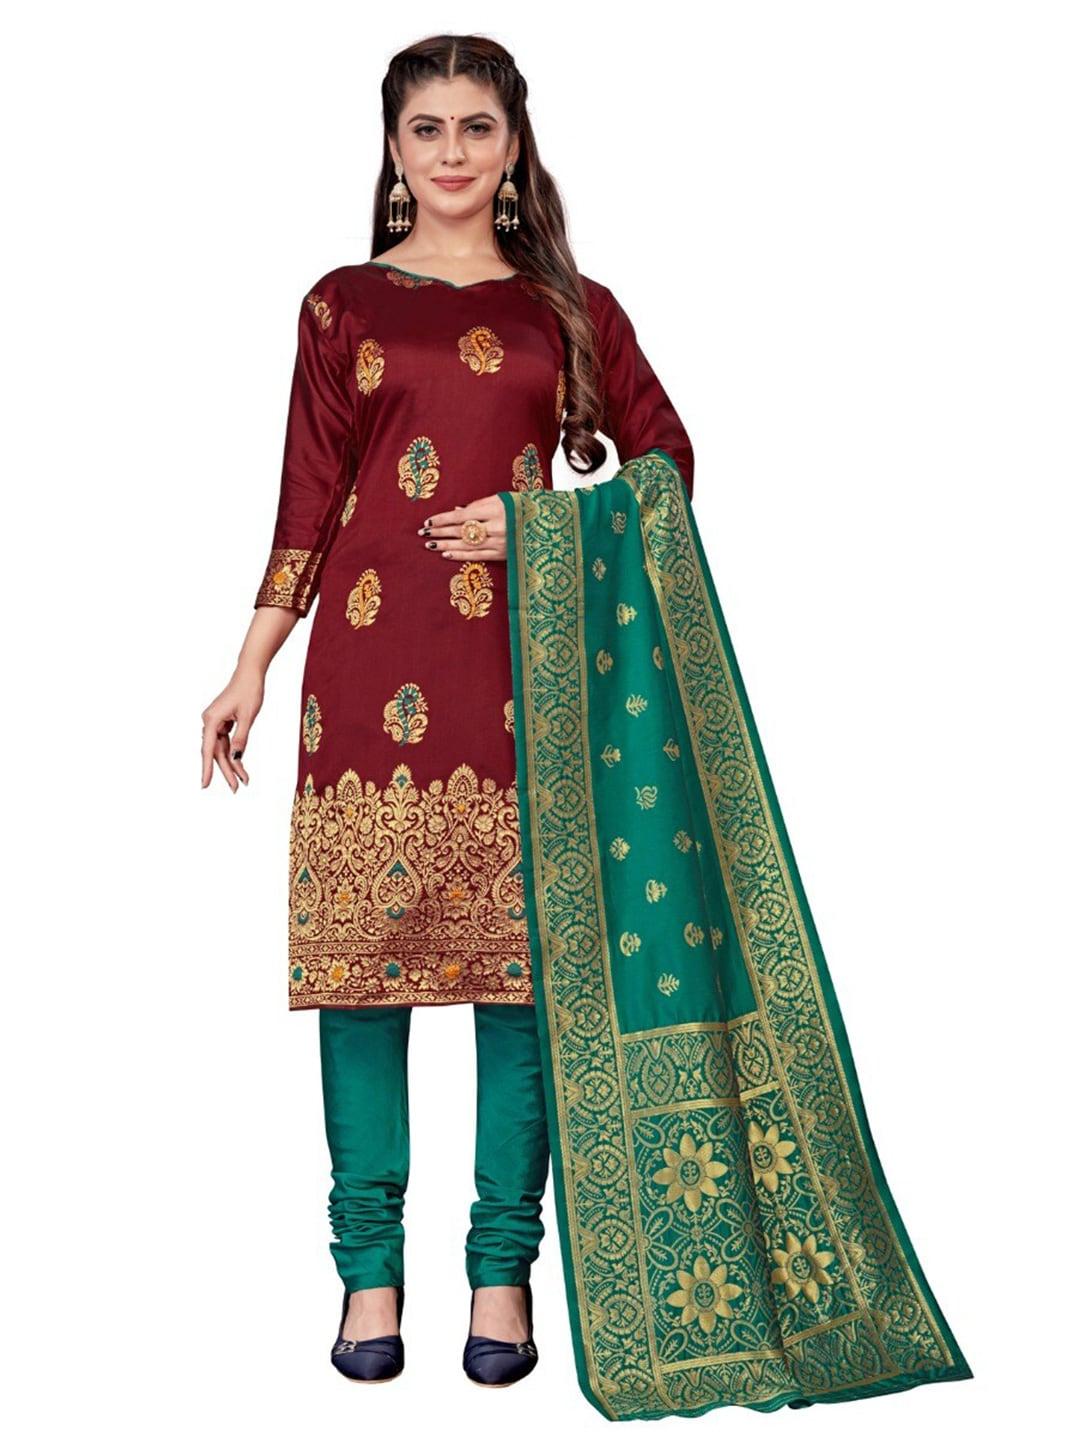 morly-women-maroon-&-green-dupion-silk-unstitched-dress-material